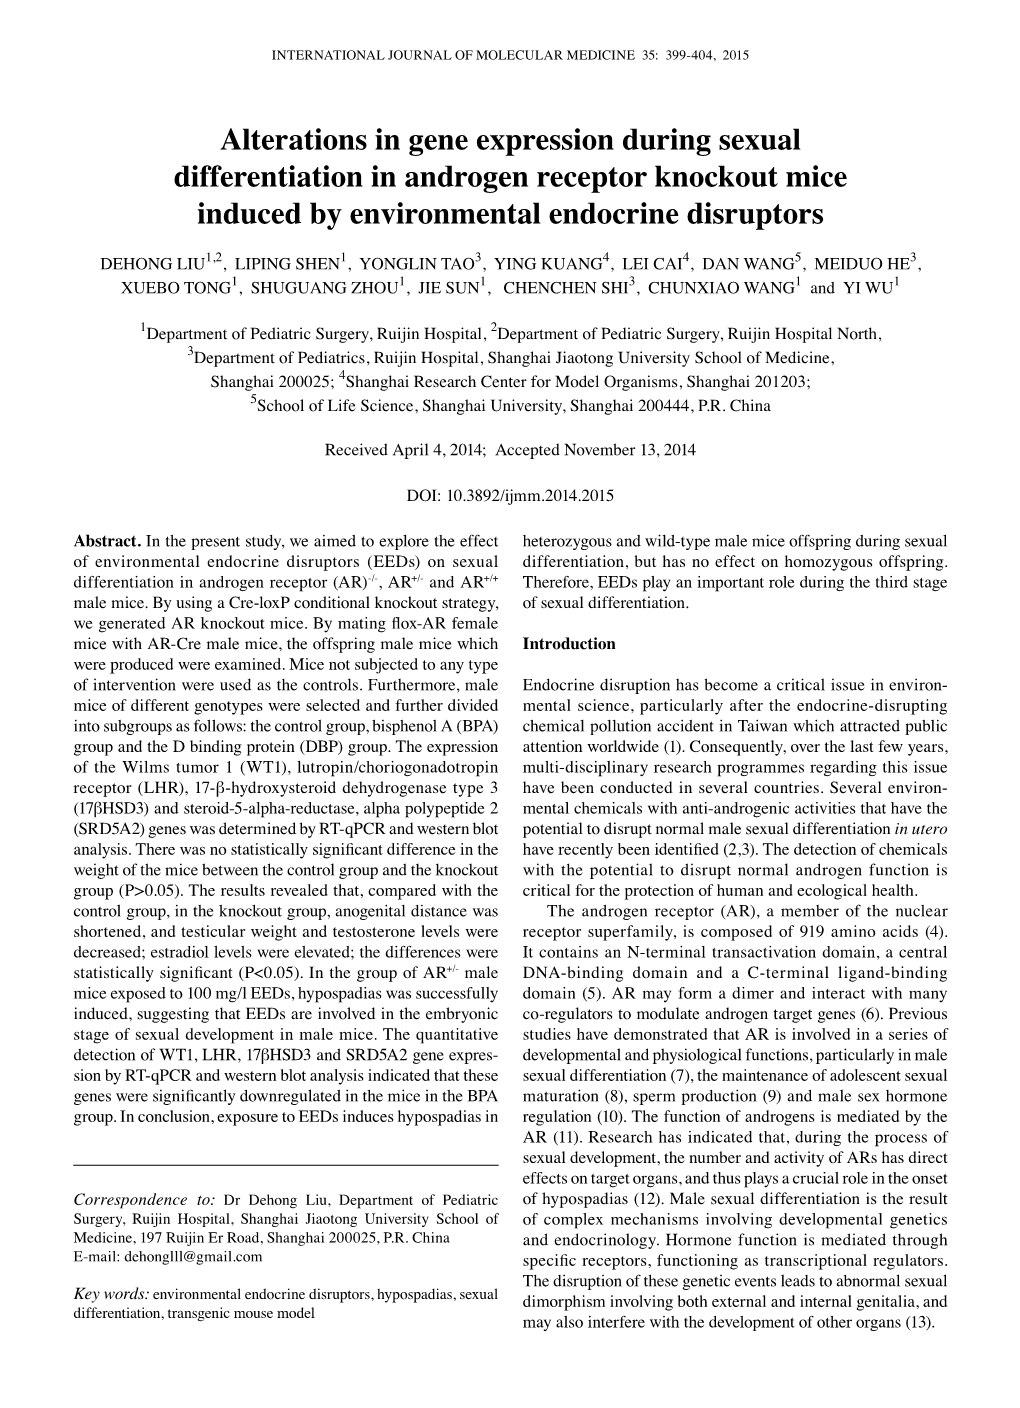 Alterations in Gene Expression During Sexual Differentiation in Androgen Receptor Knockout Mice Induced by Environmental Endocrine Disruptors